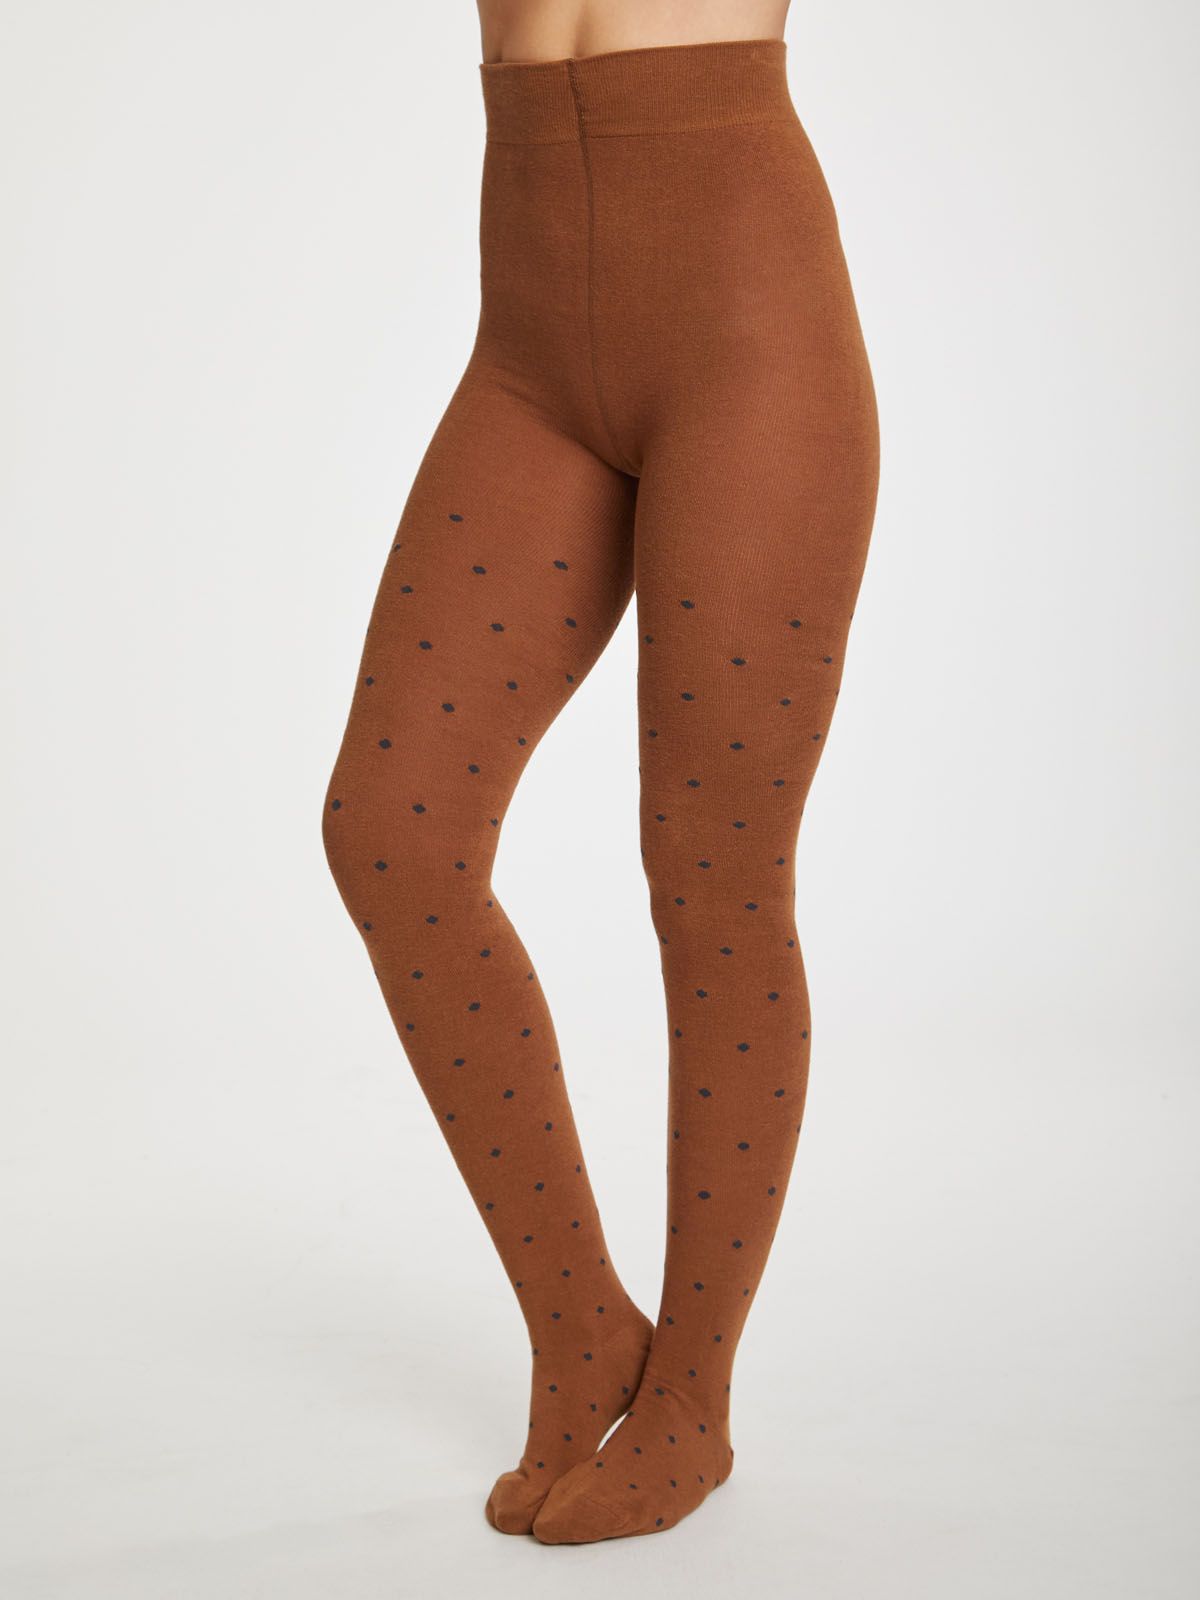 10 Sustainable Hosiery Brands to Keep Your Legs Warm — Sustainably Chic